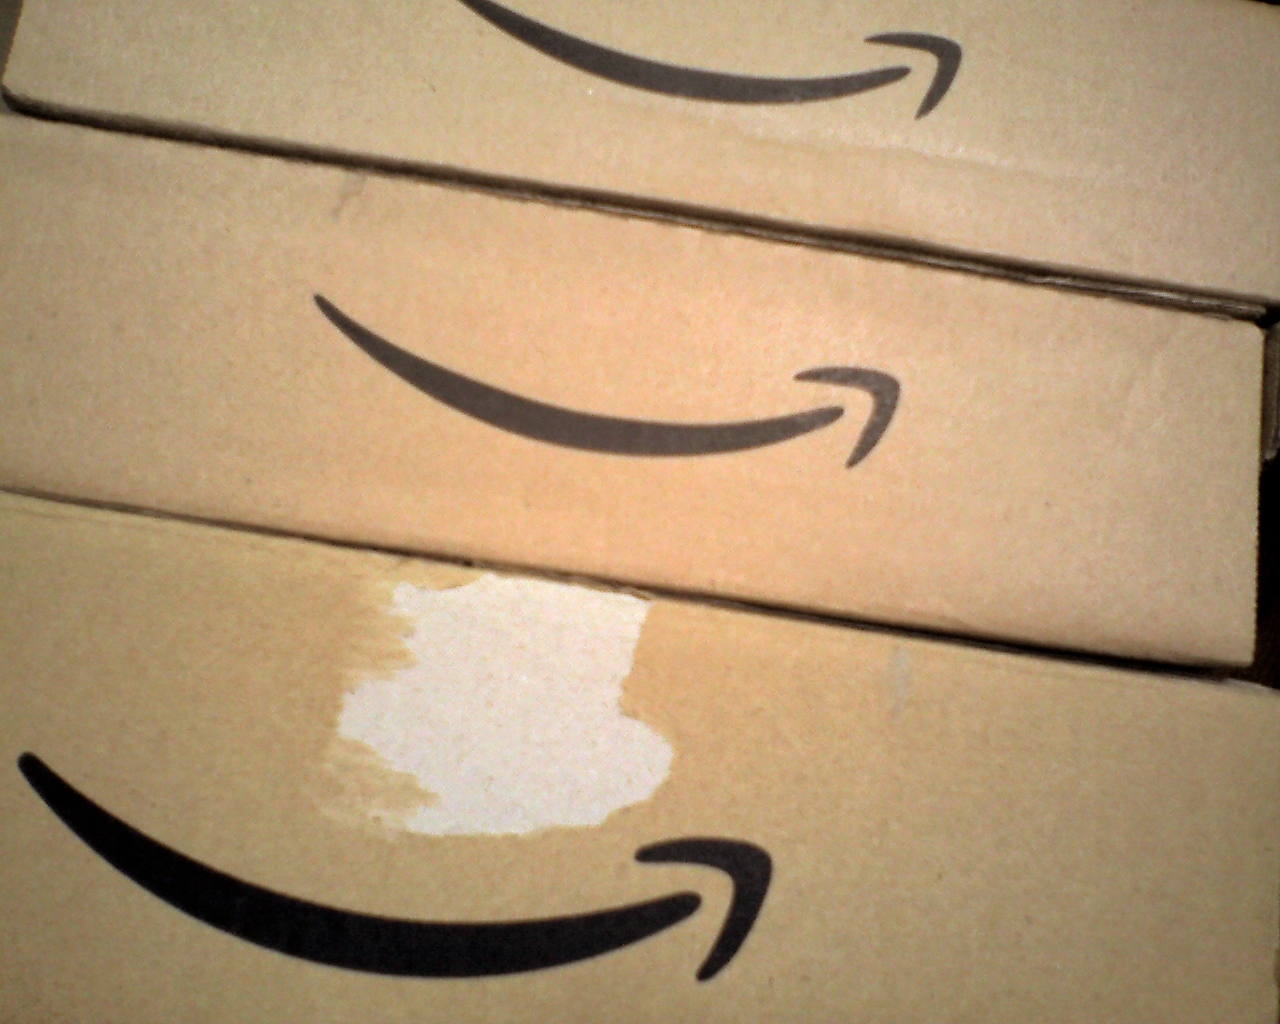 Amazon Flex Launches In Seattle, Allows Regular Joes To Earn Money Delivering Prime Now Packages